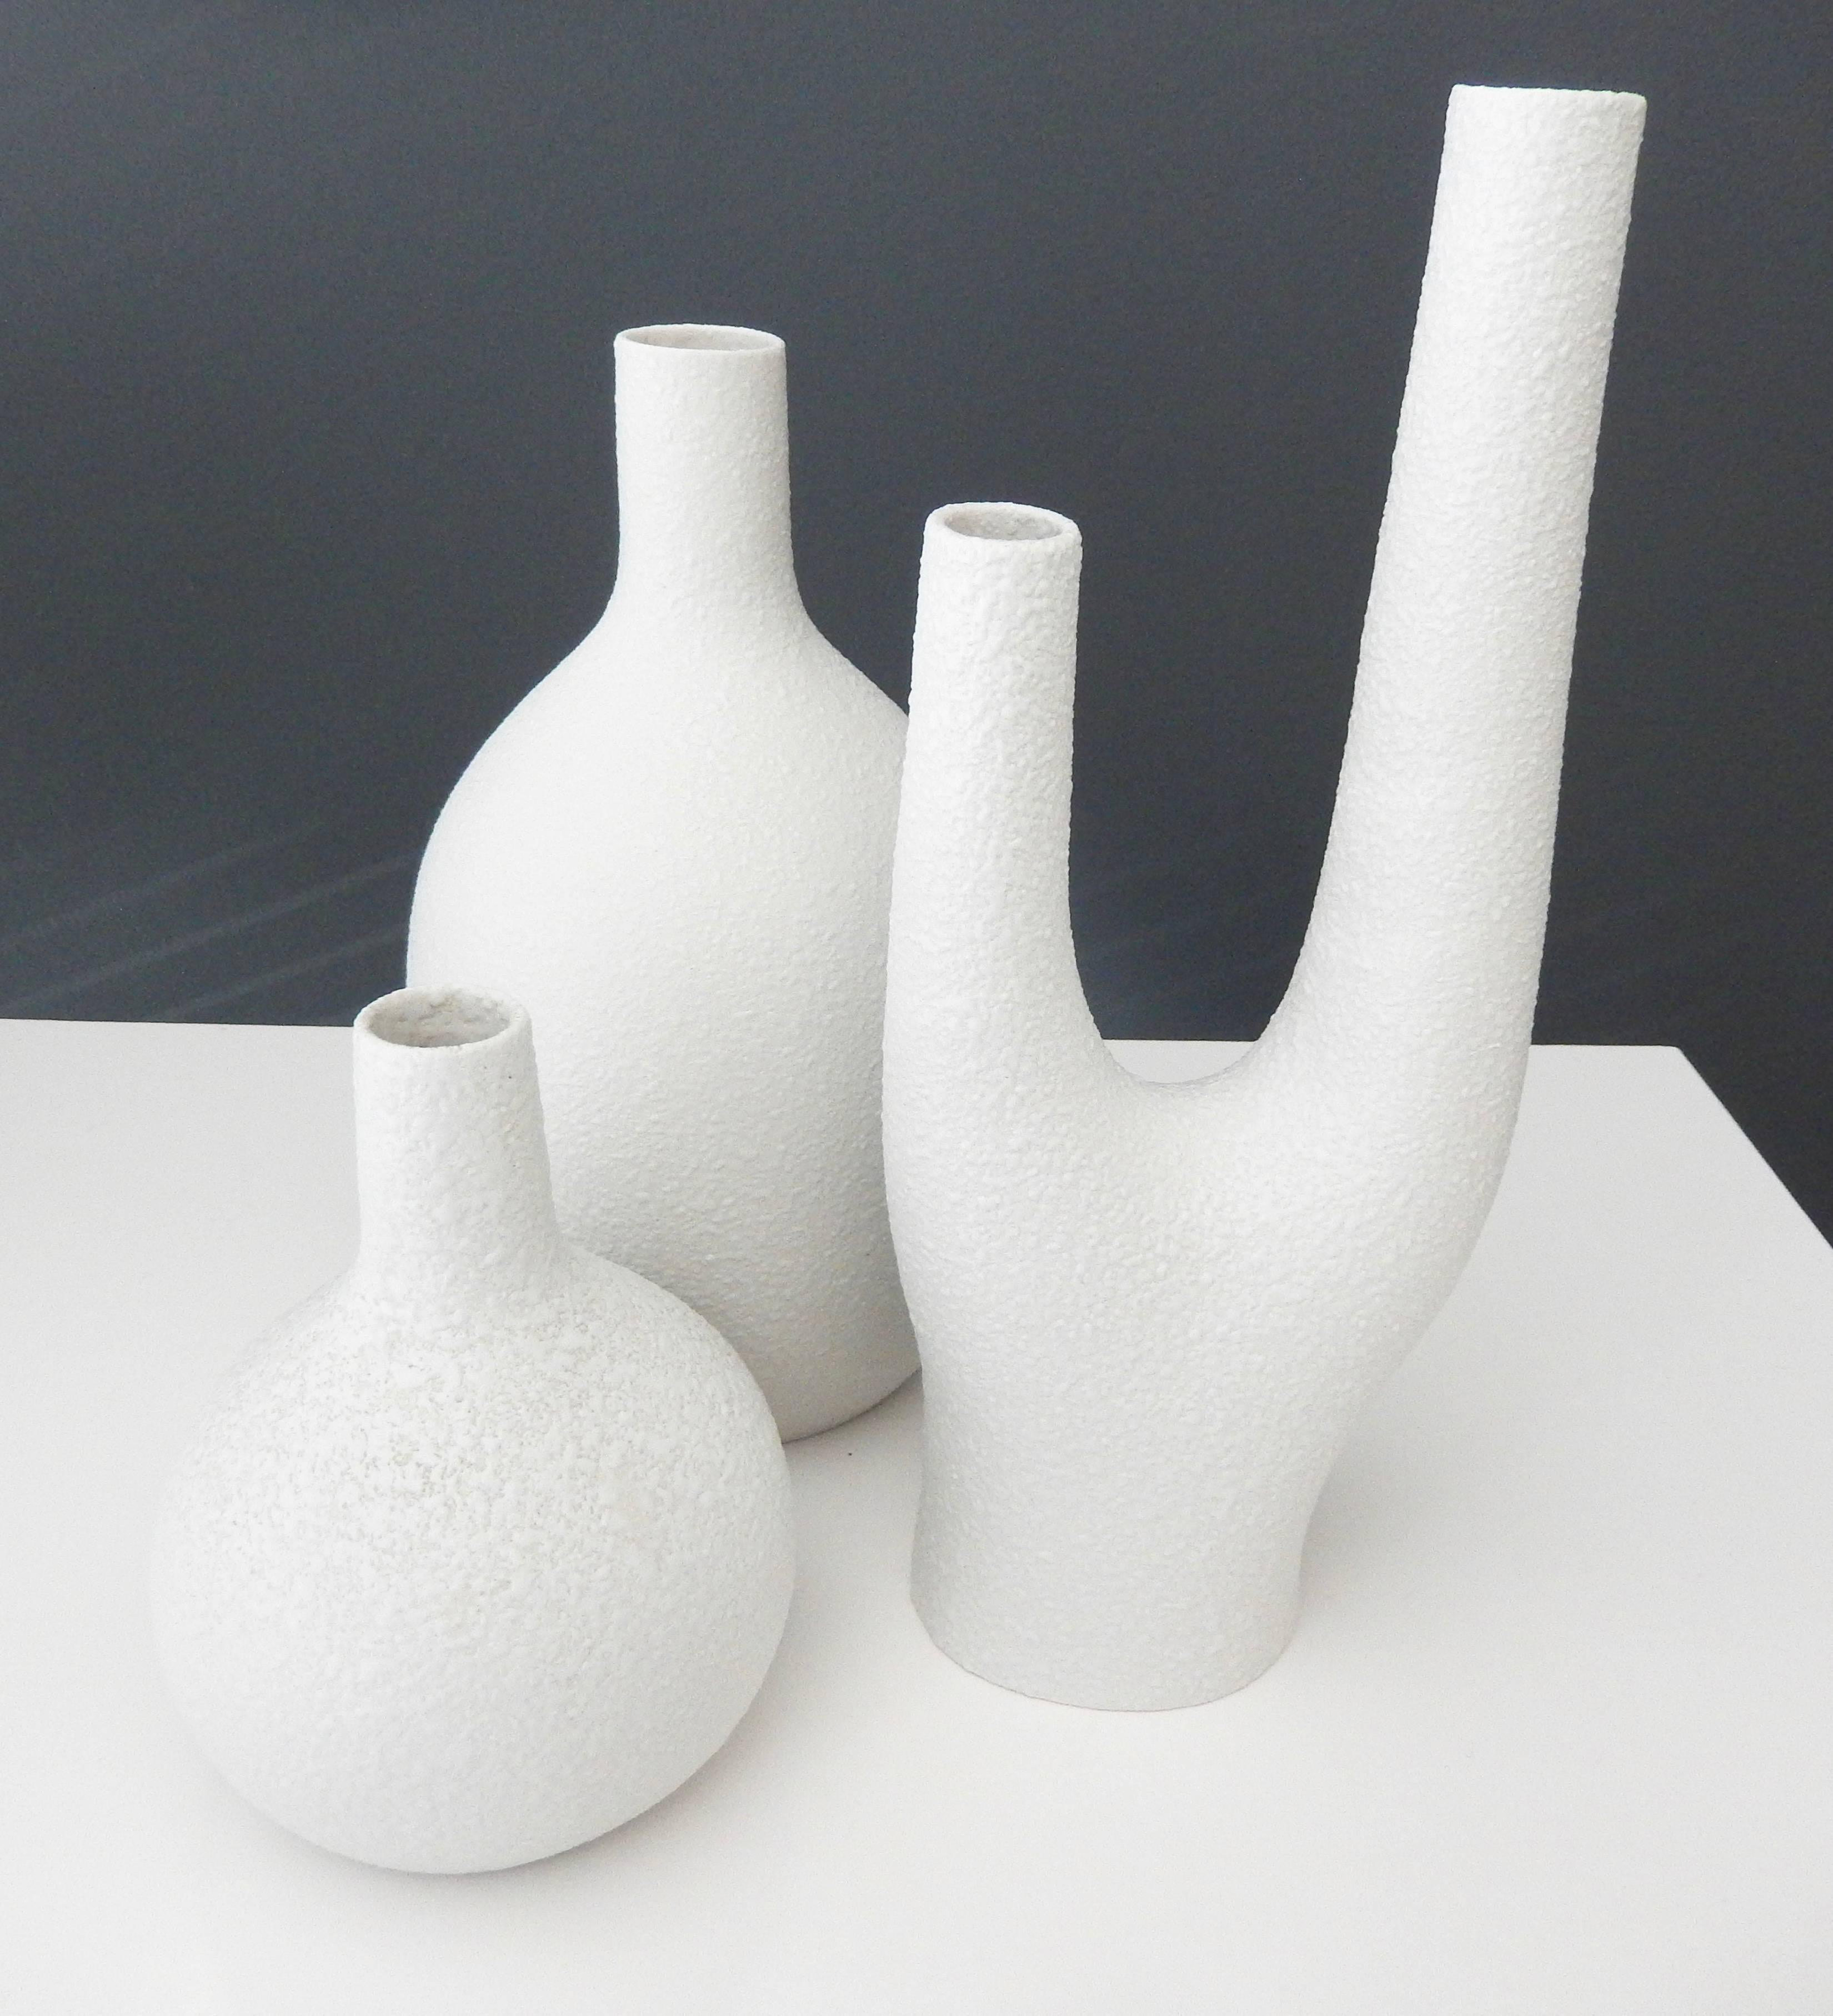 A group of three white porcelain vases by the innovative designer Peter Muller for Sgrafo Modern.

In 1955 two brothers, Peter and Klaus Muller opened a small porcelain factory in Germany and created some of the most modern, futuristic-looking